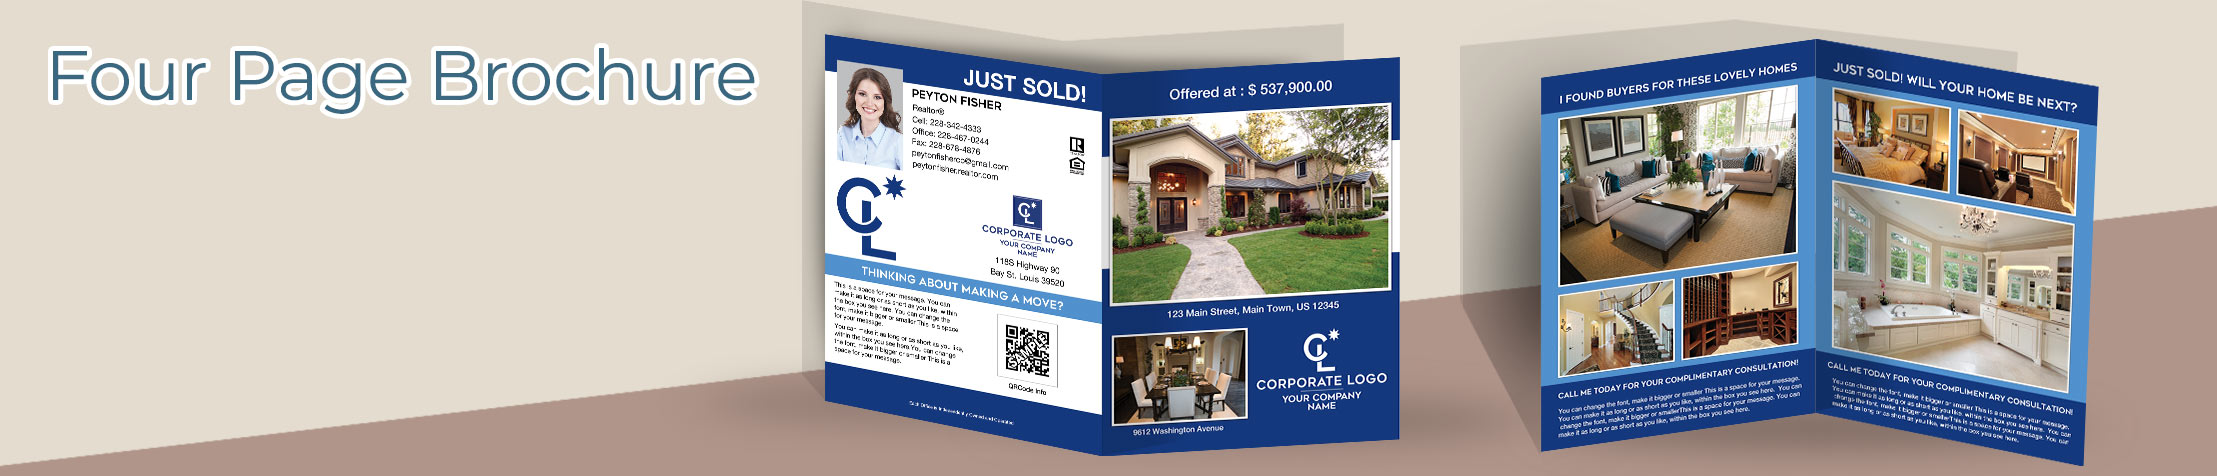 Coldwell Banker Real Estate Flyers and Brochures - Coldwell Banker four page brochure templates for open houses and marketing | BestPrintBuy.com